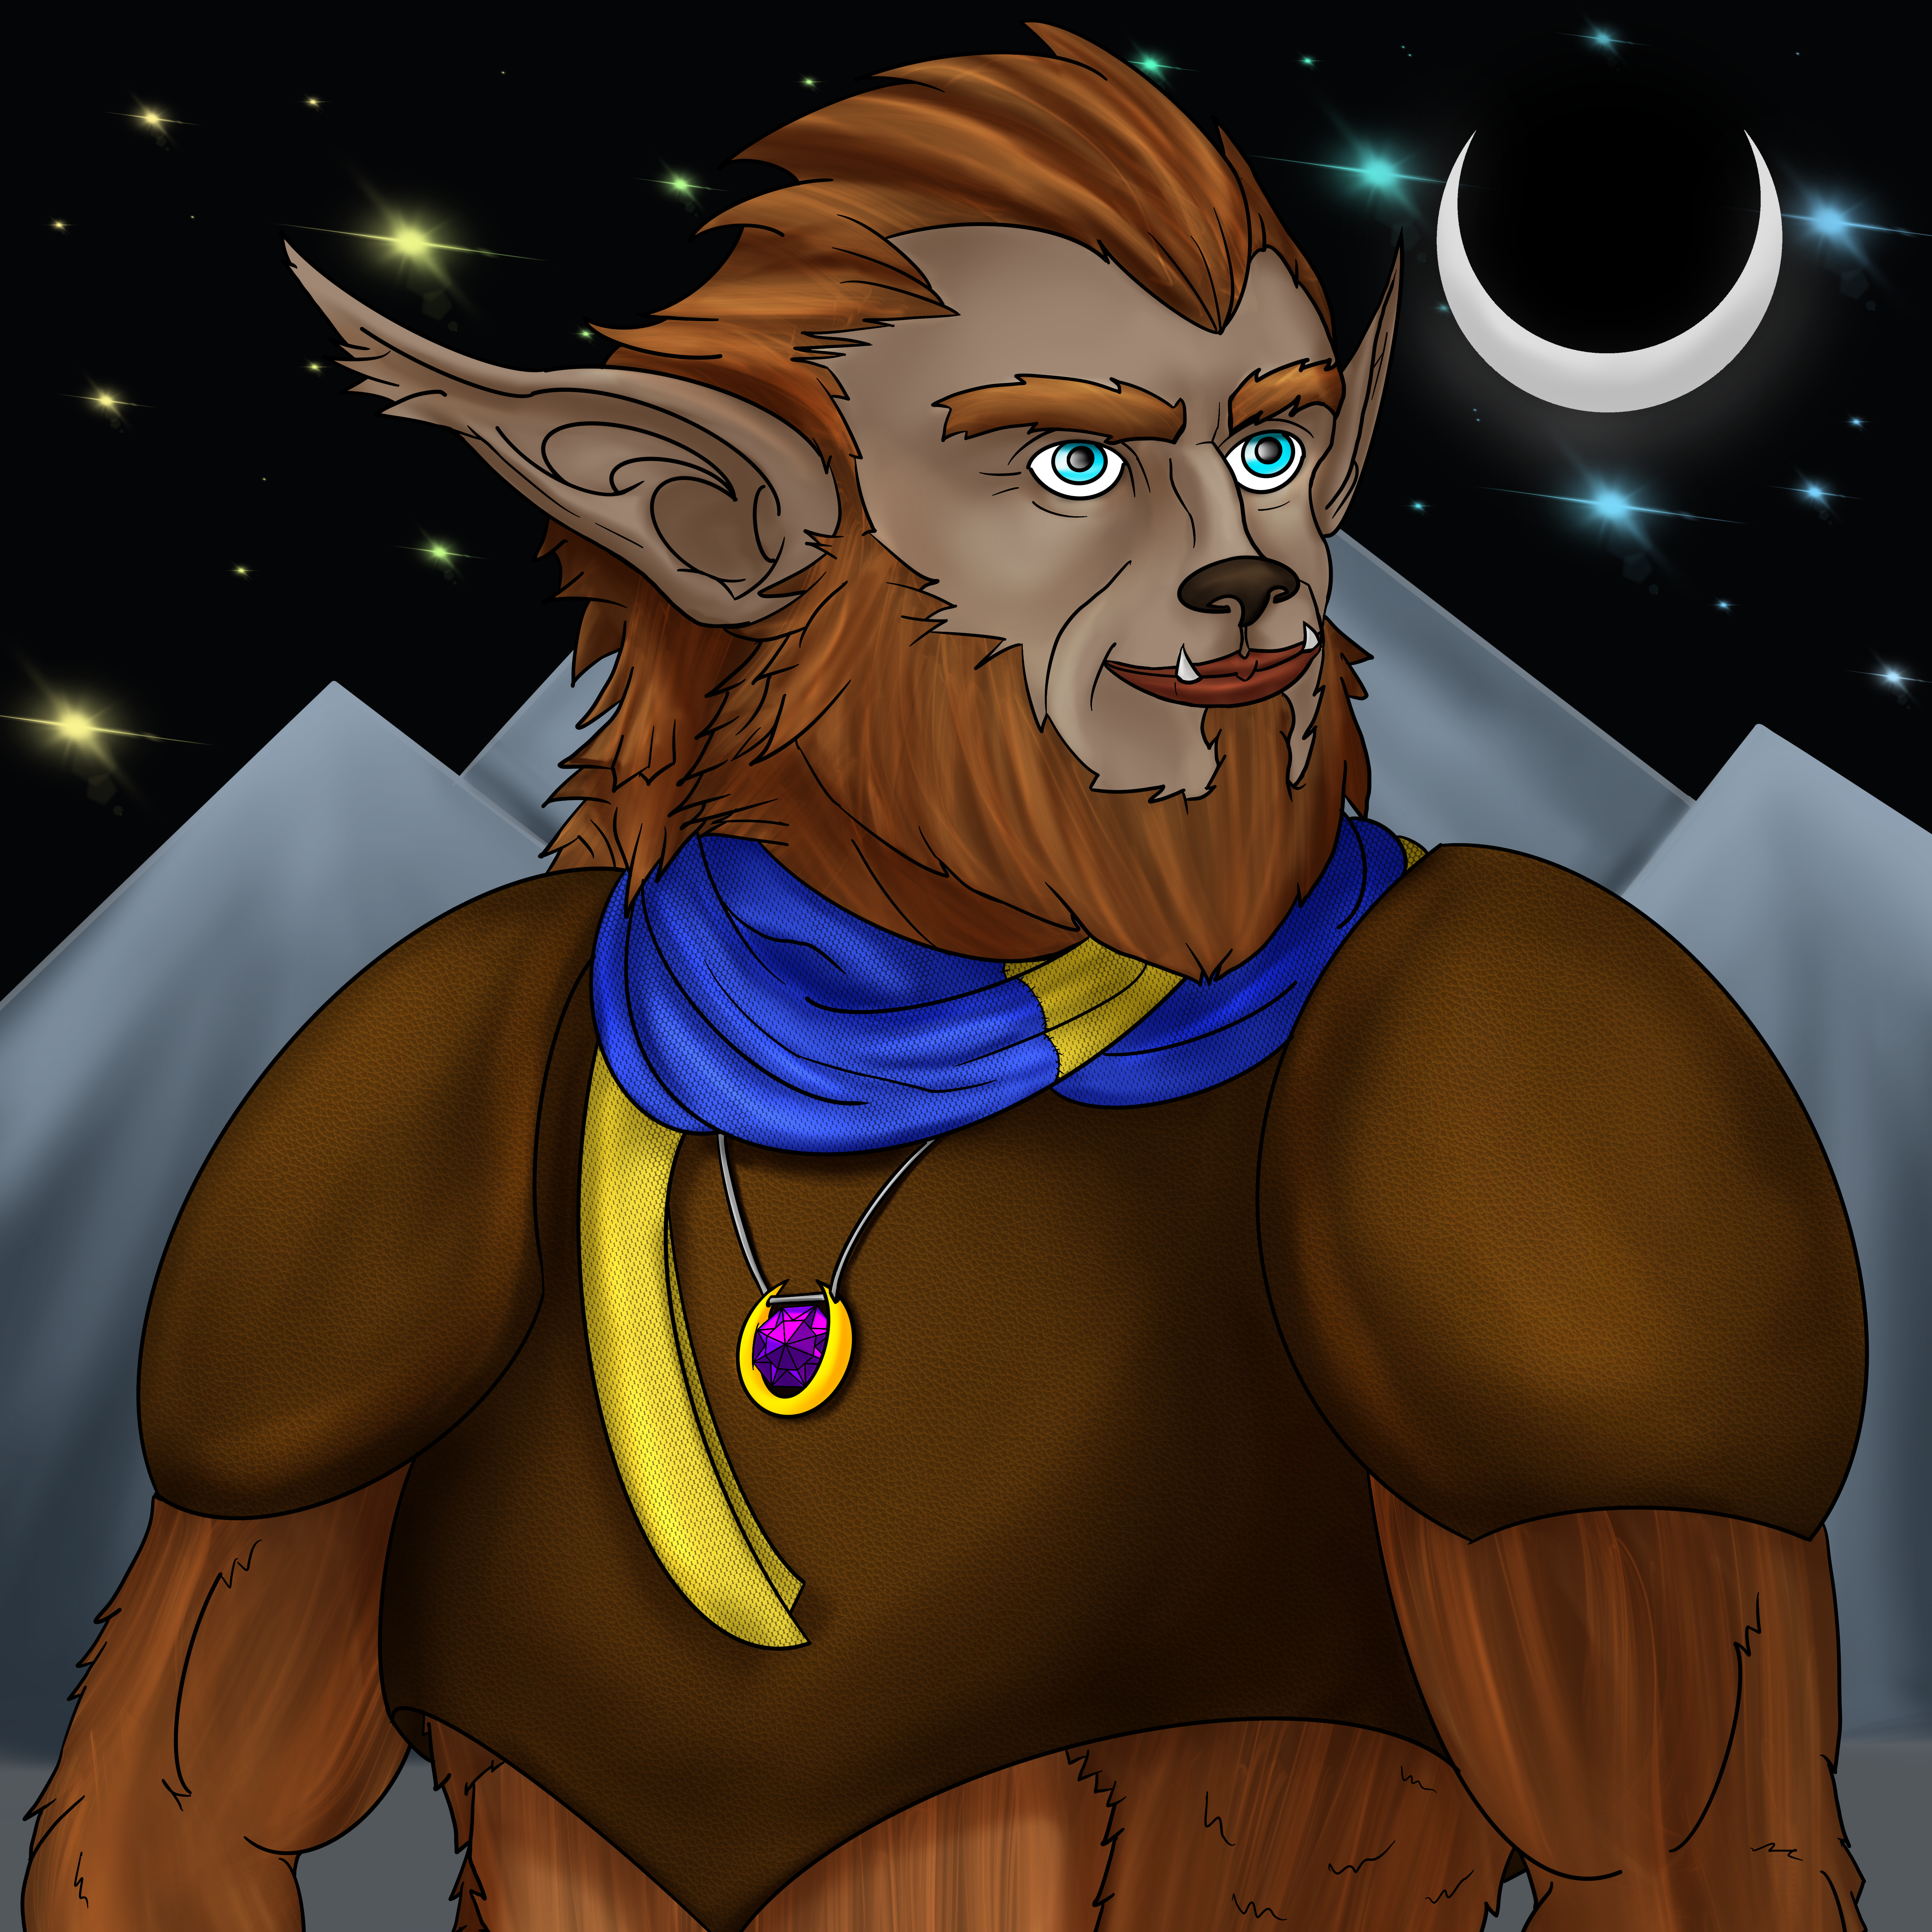 For the first time in 5 years, I am playing a D&D character in a campaign. Not running the campaign, not playing a thousand and one NPCs, but my very own Player Character. This is Wally the Bugbear, a Junior Grub Scout of the Hobgoblin Dominion, Hashara. I'm having so much fun playing a snot-nosed teen as a shaman with a deep connection to nature.